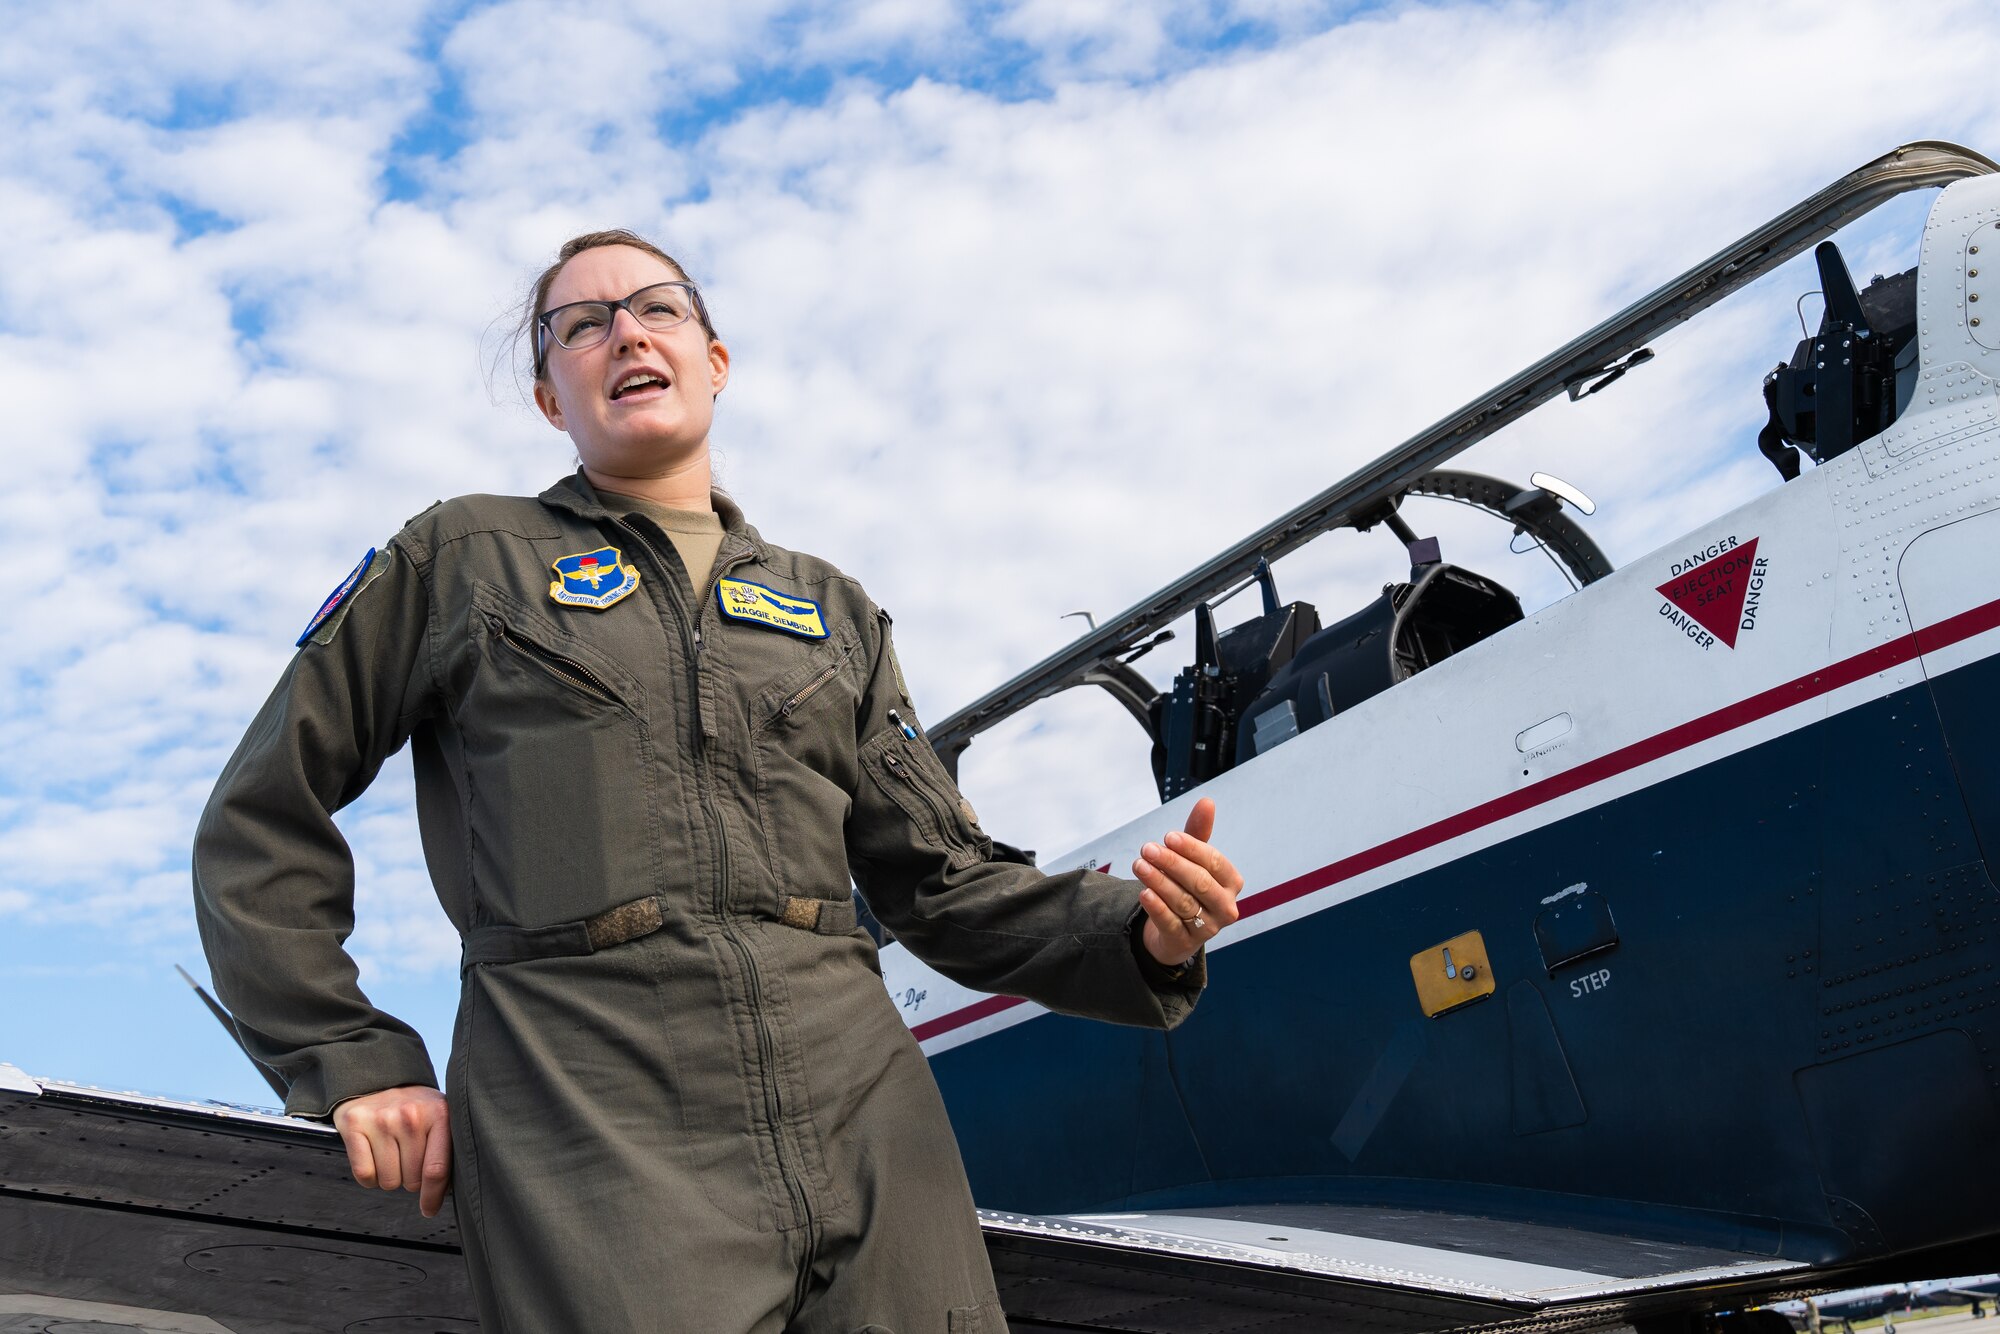 U.S. Air Force Capt. Maggie Siembida, 85th Flying Training Squadron instructor pilot, speaks during an Aviation Inspiration Mentorship event at MacDill Air Force Base, Florida, Oct. 15, 2022.